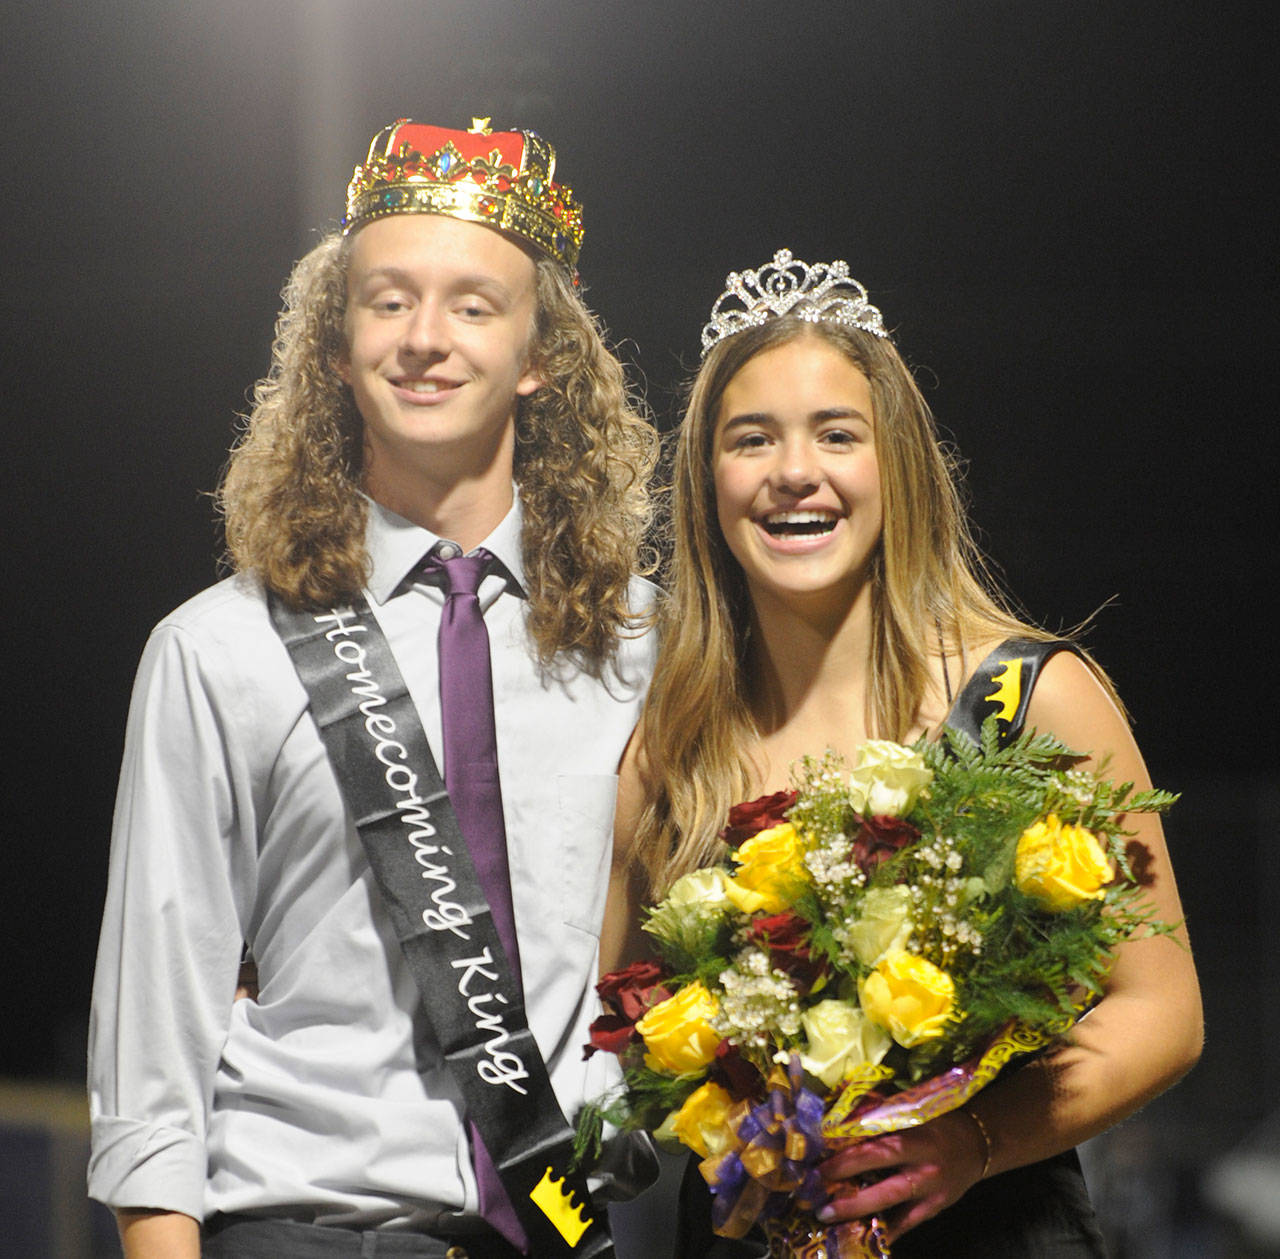 Michael McAleer and Hope Glasser are named 2019 Sequim High School Homecoming King and Queen on Oct. 4. Sequim Gazette photo by Michael Dashiell